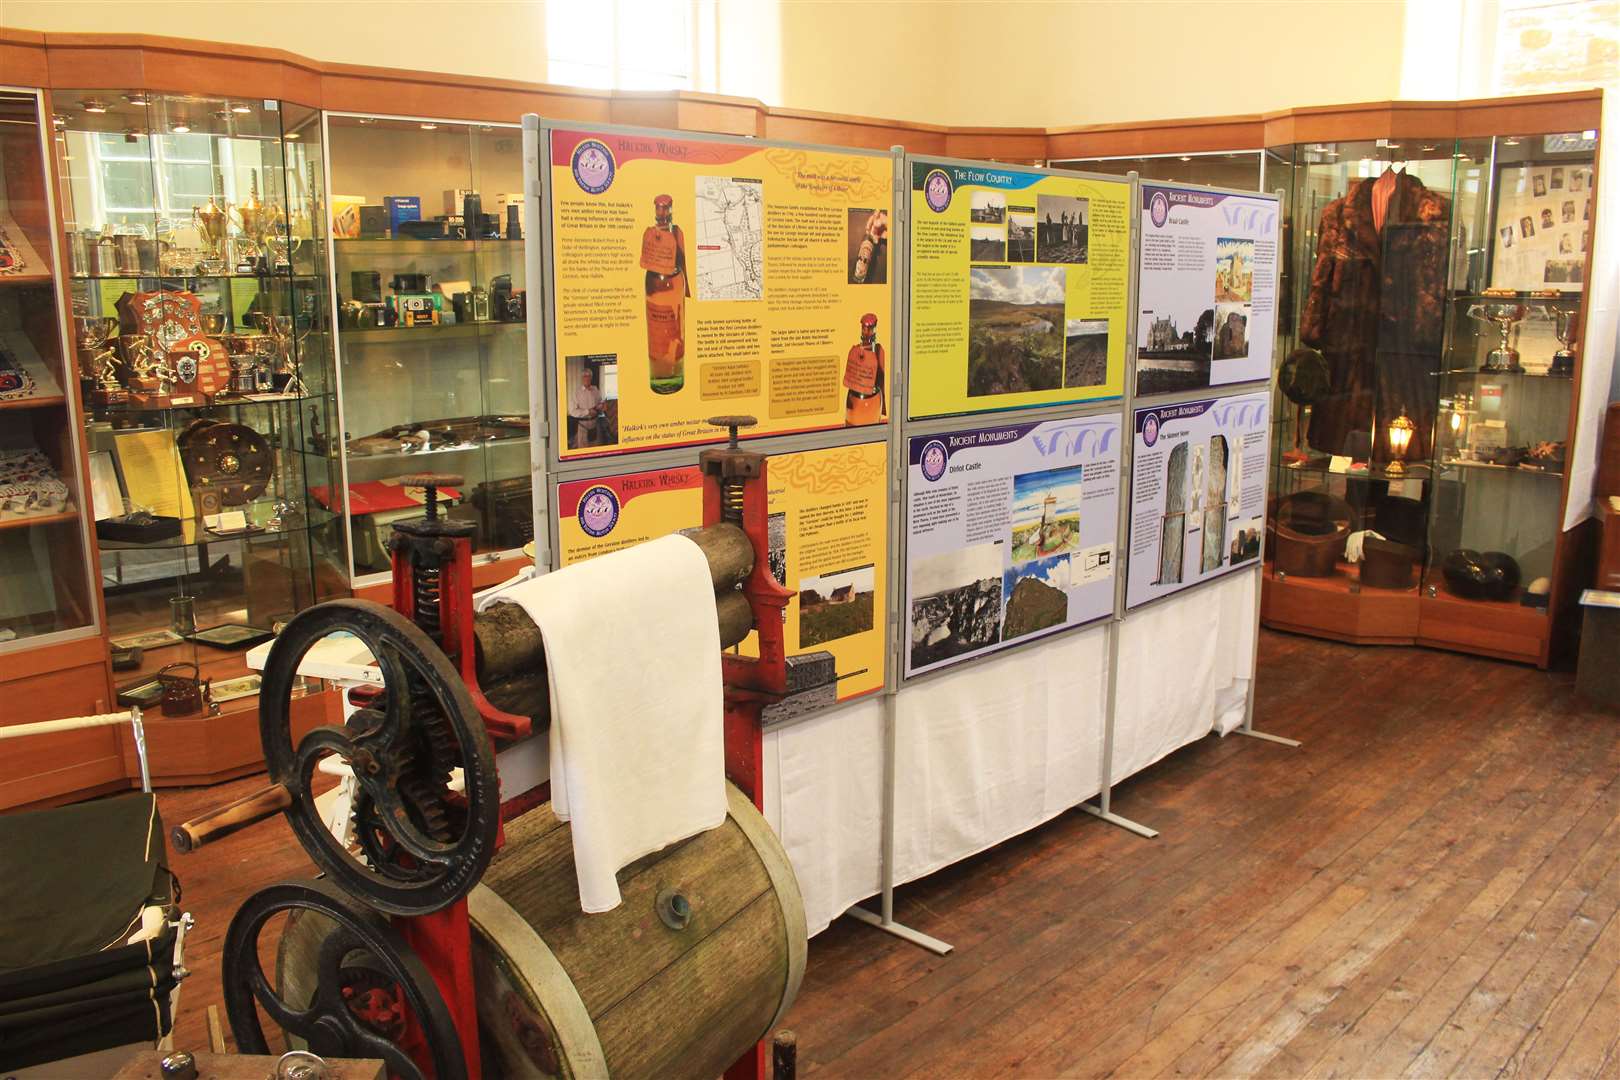 One of the local history displays in the newly opened Halkirk centre.